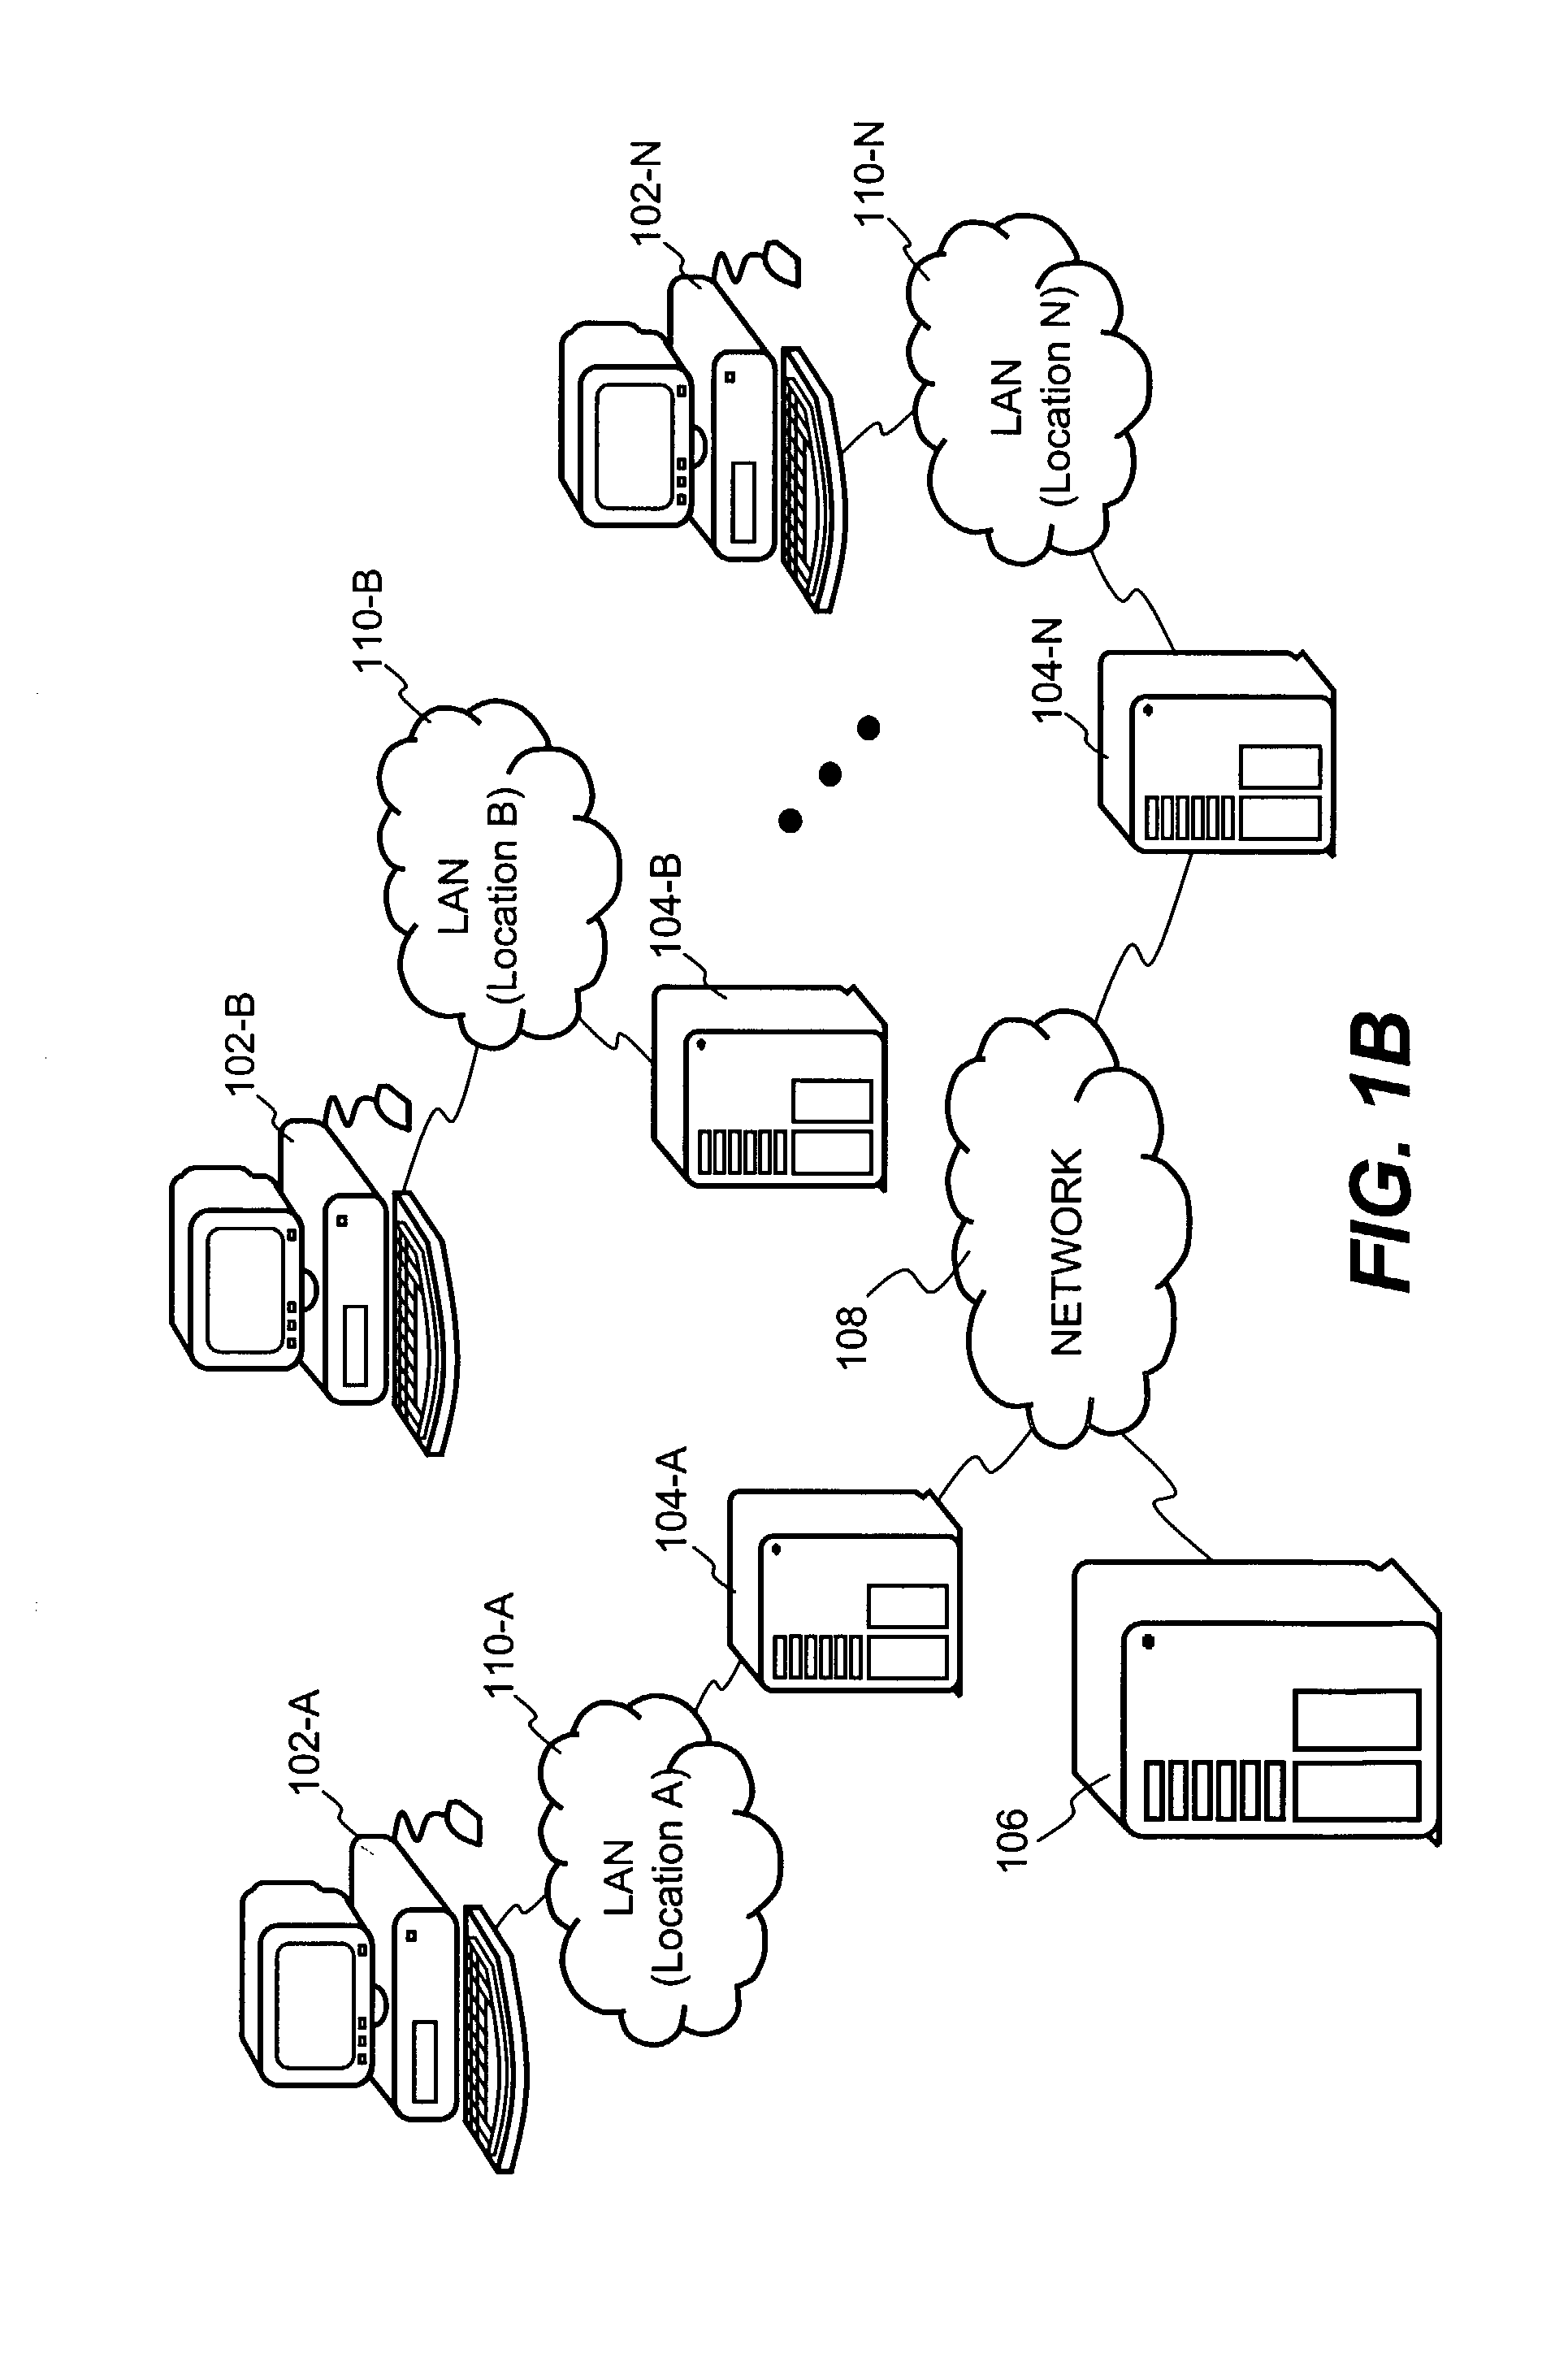 Method and system for implementing changes to security policies in a distributed security system